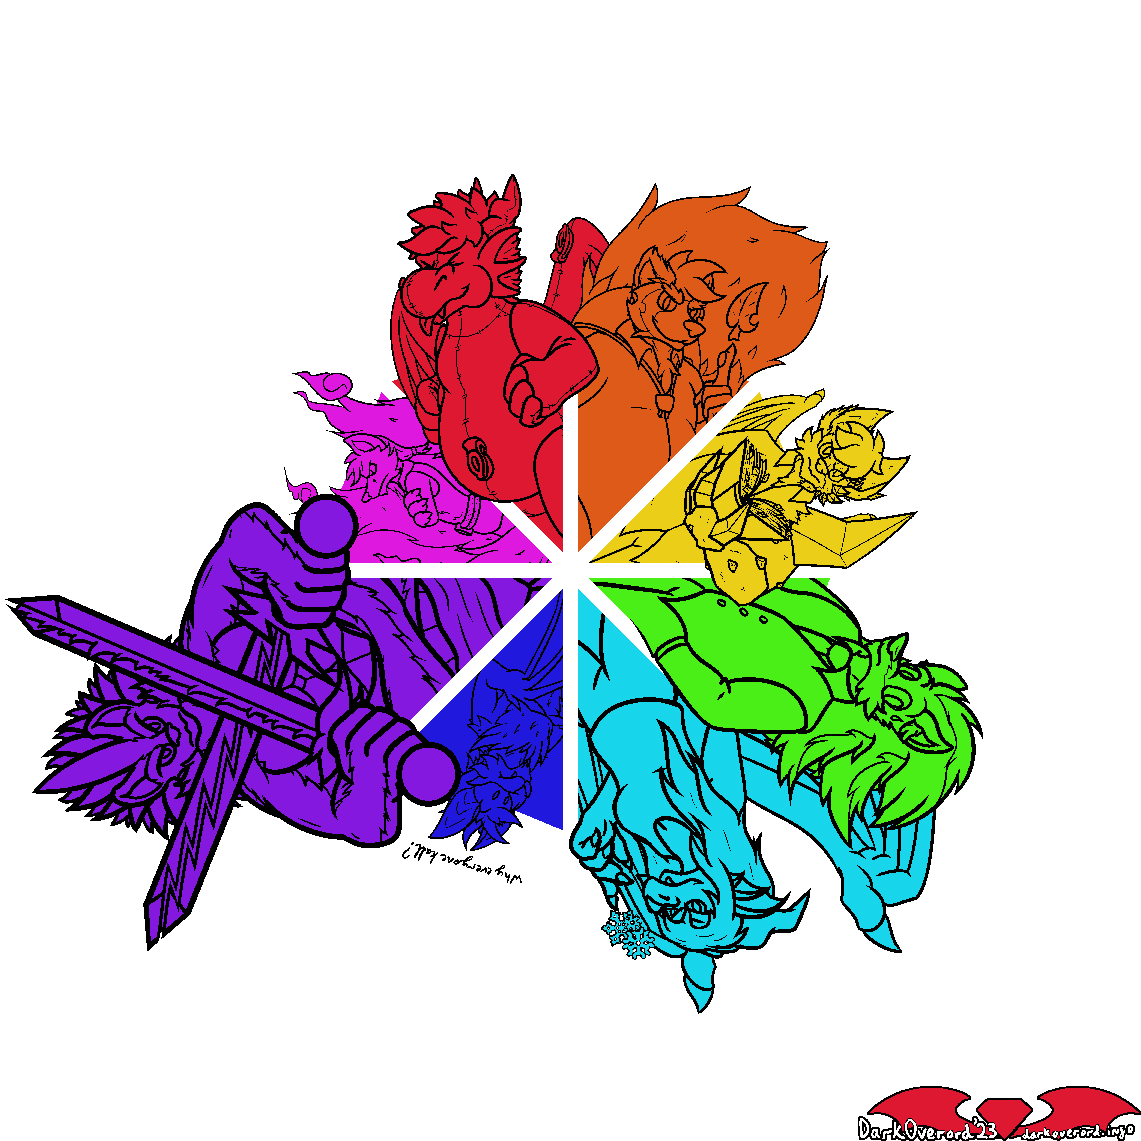 Art of a colour wheel where each colour has had a character of DarkOverord's chosen. Red is a red dragon toy, DarkOverord. Orange is a tanuki, Marcus. Yellow is a fox-bat-rock elemental hybrid, JOS. Green is a green hedgehog, Malrak. Cyan is a blue dragon, Lucernaz Occassus Blue is a blue bat, Ferris. Purple is a four armed tall tenric, Adjuro Simul. Pink is a white kitsune, Annai.